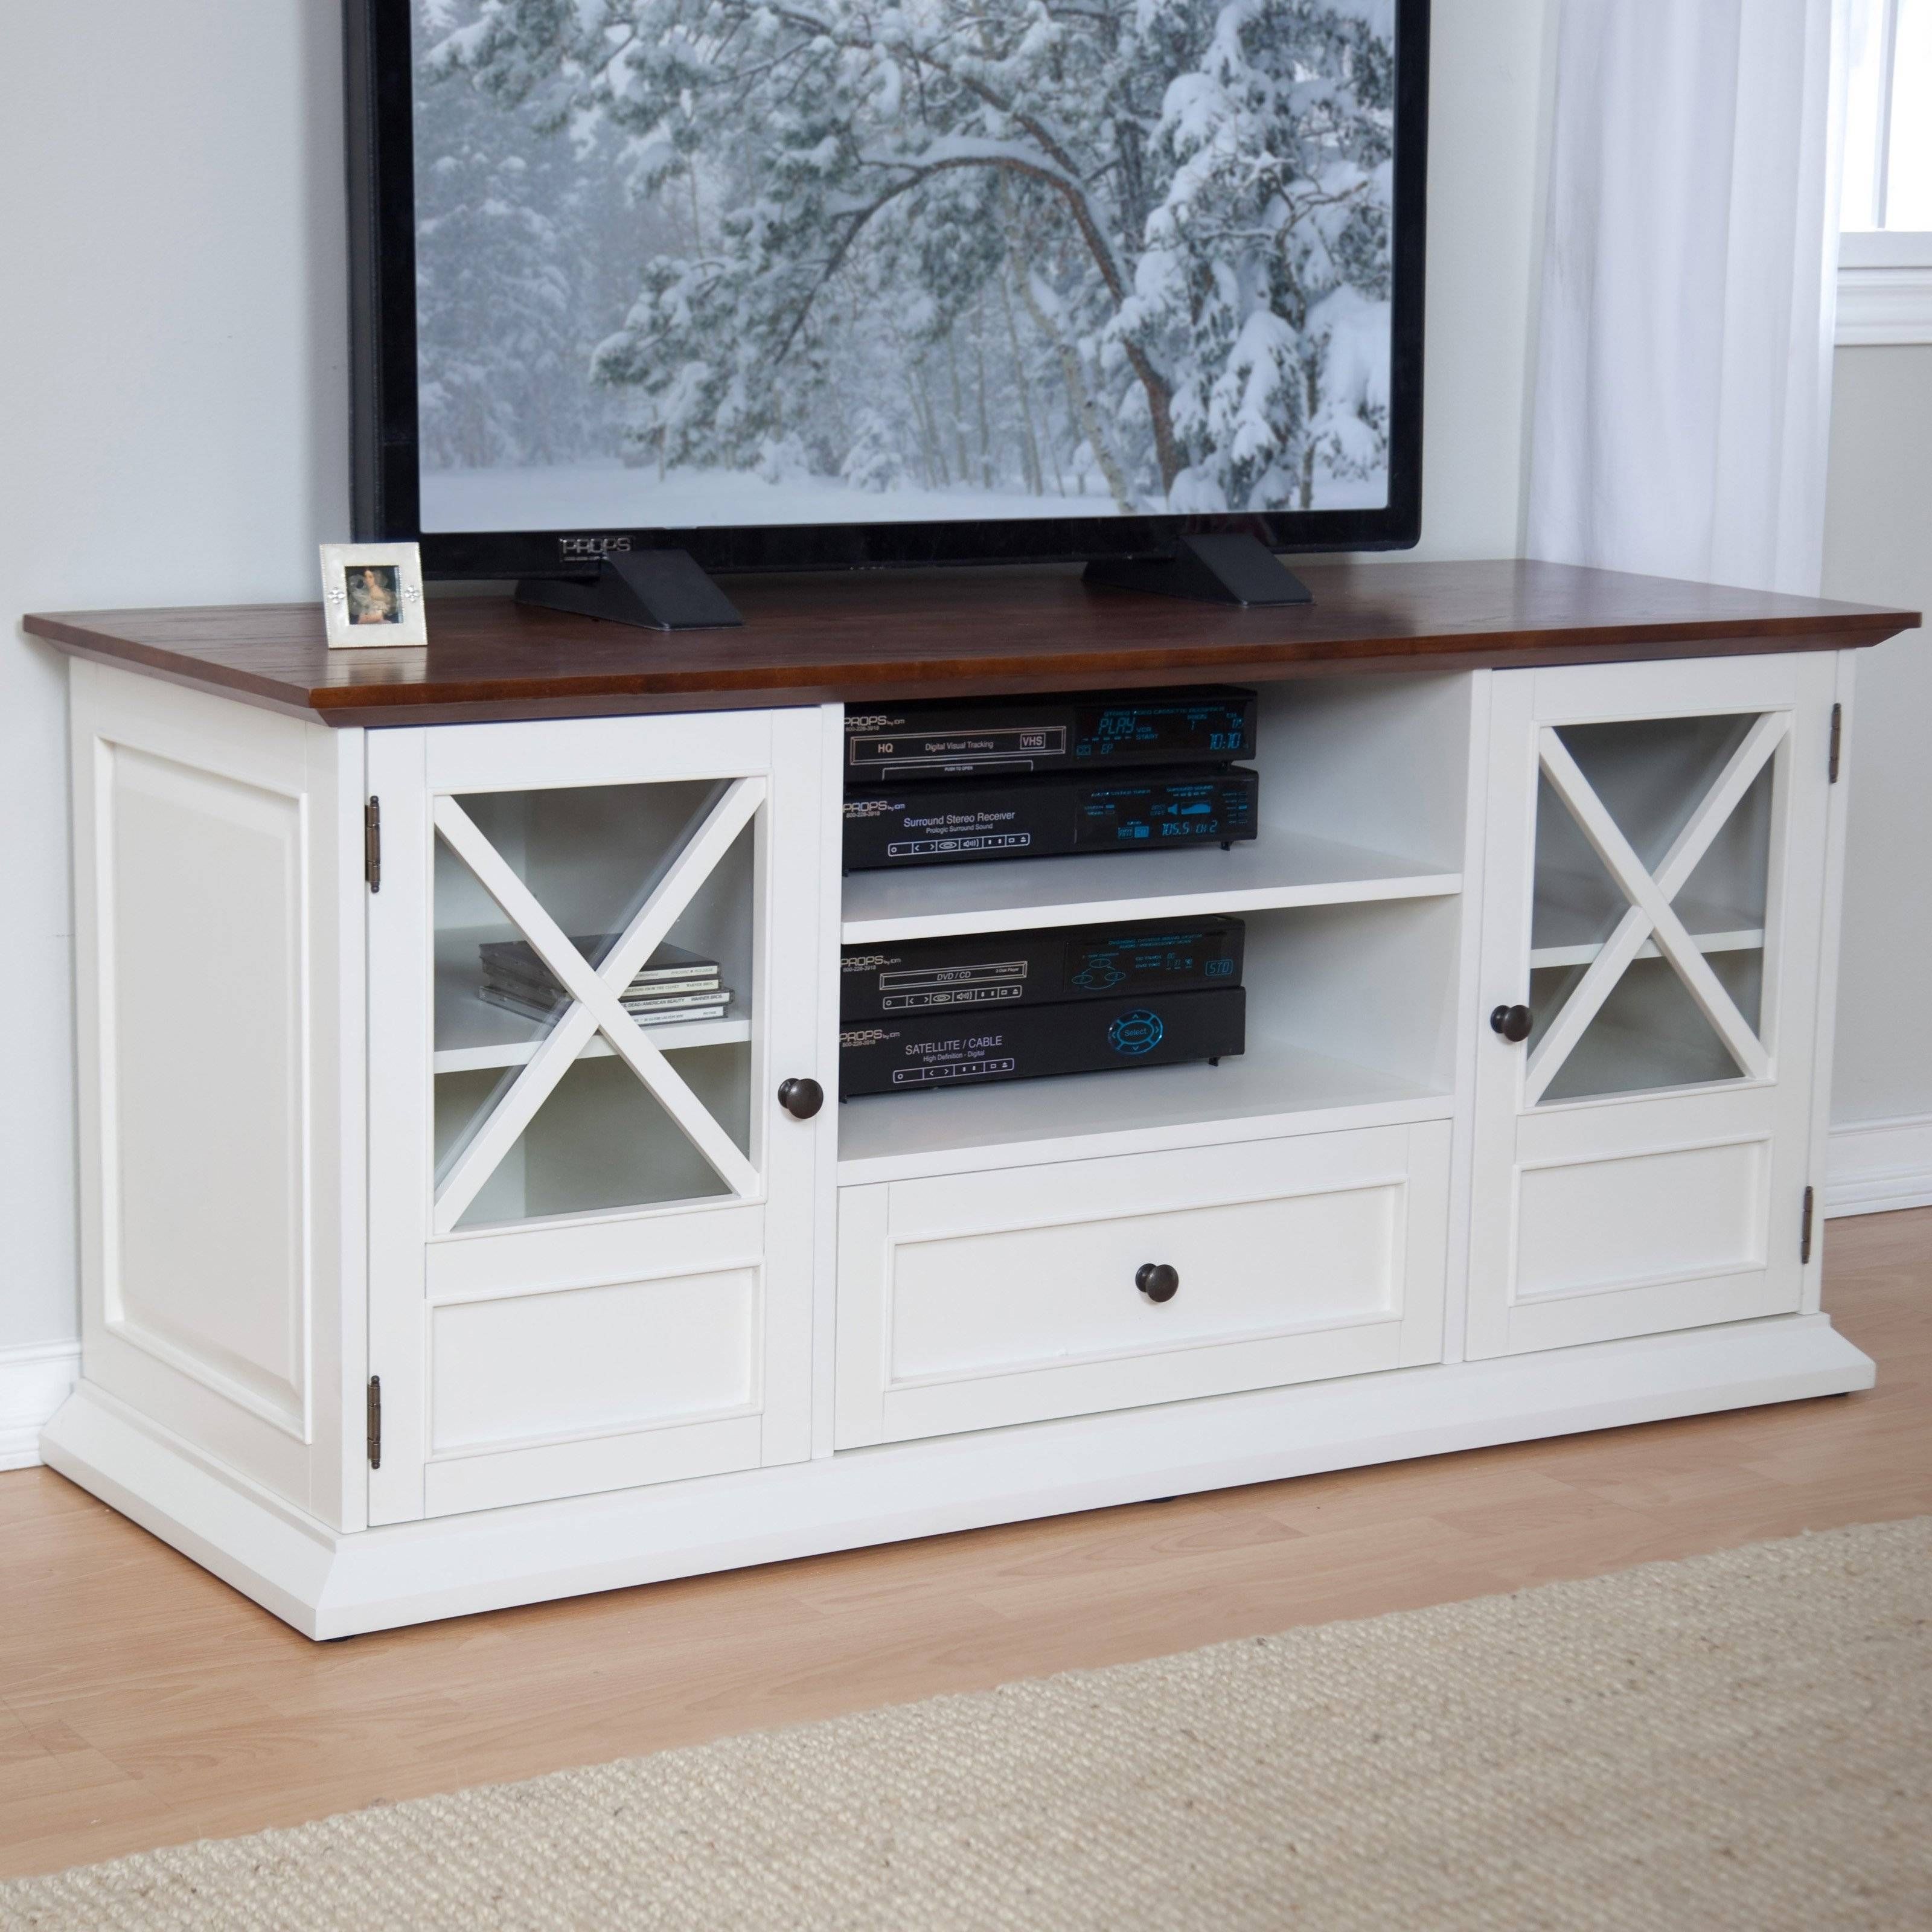 Belham Living Hampton Tv Stand – White/oak | Hayneedle Within White Glass Tv Stands (View 3 of 15)